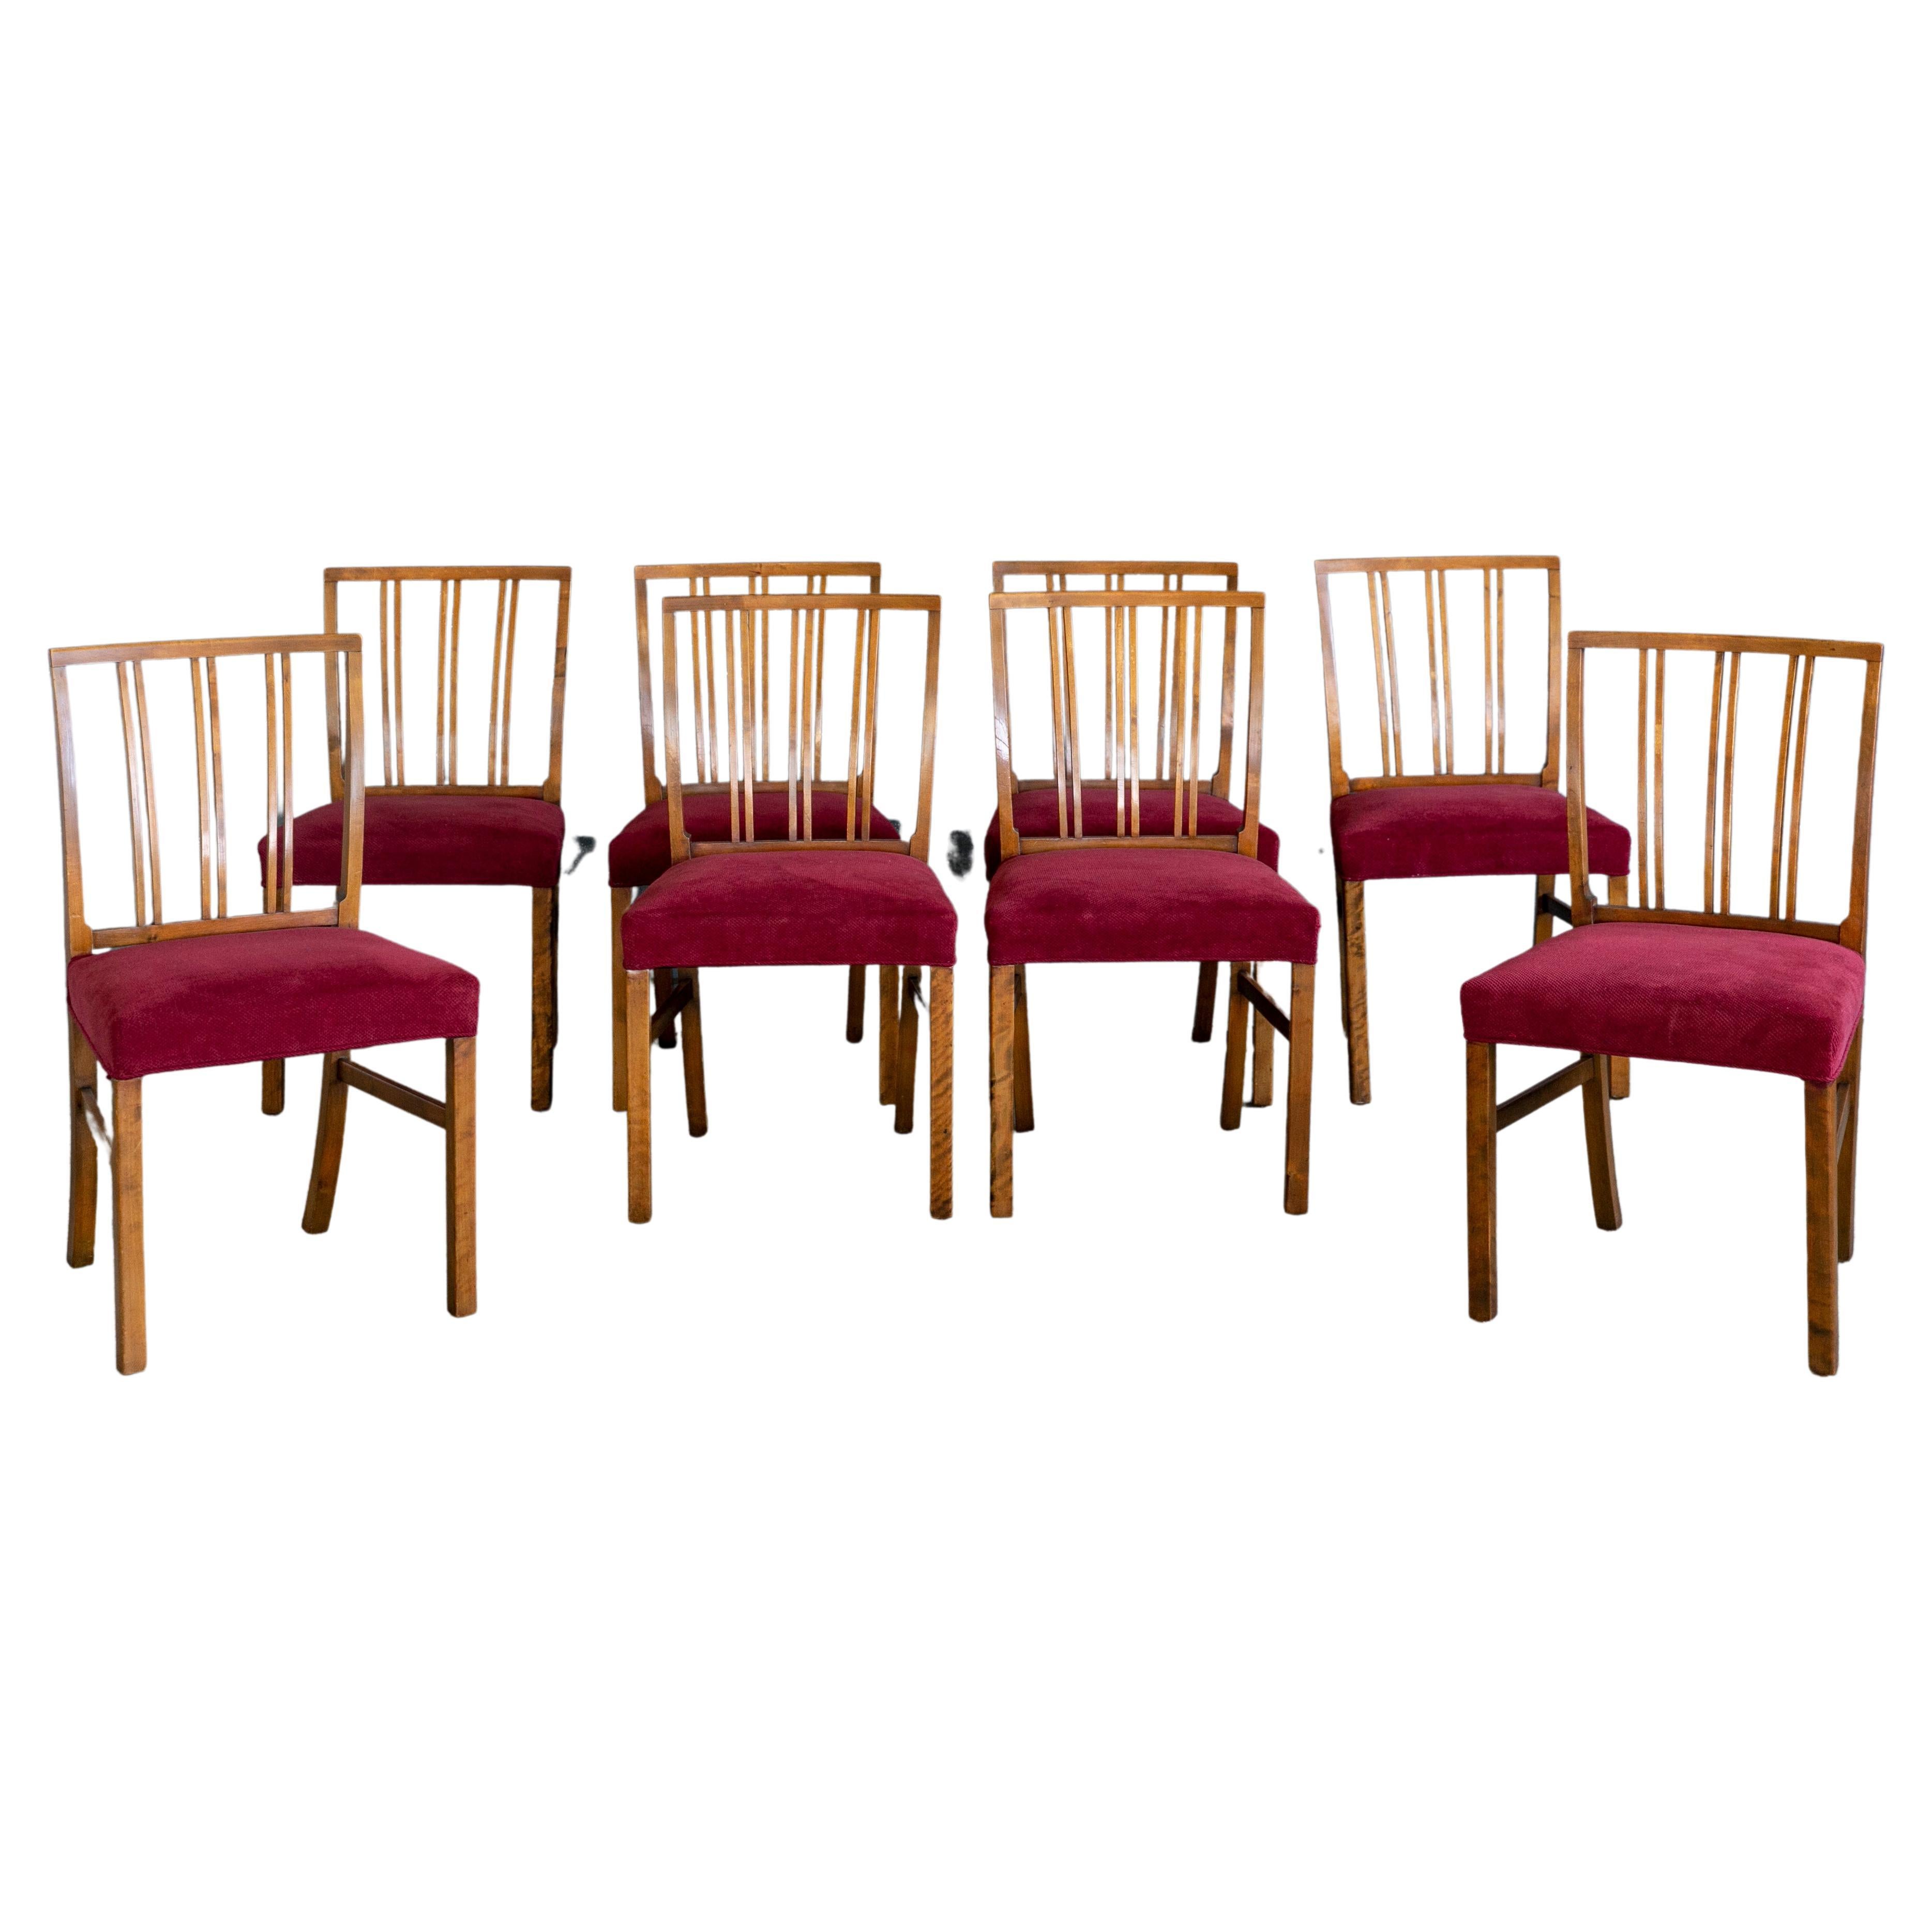 Set of 8 Danish Dining Chairs in Walnut by Th Schmidt 1940's